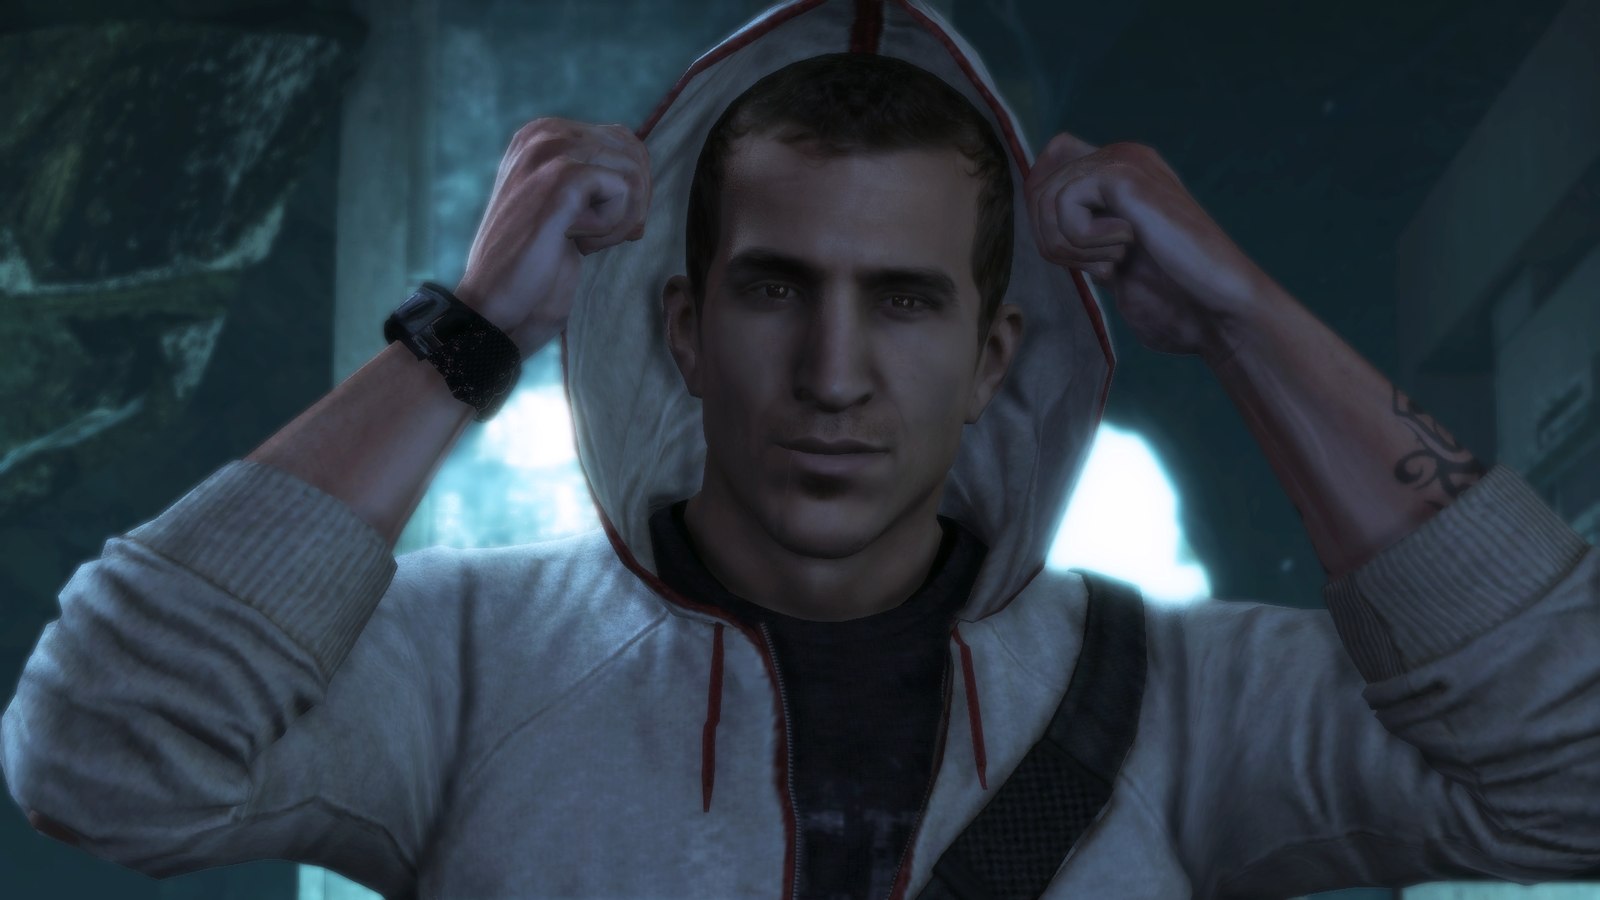 http://fc06.deviantart.net/fs71/i/2013/014/d/c/desmond_miles___assassin__s_creed_iii_by_nylah22-d5rie09.png